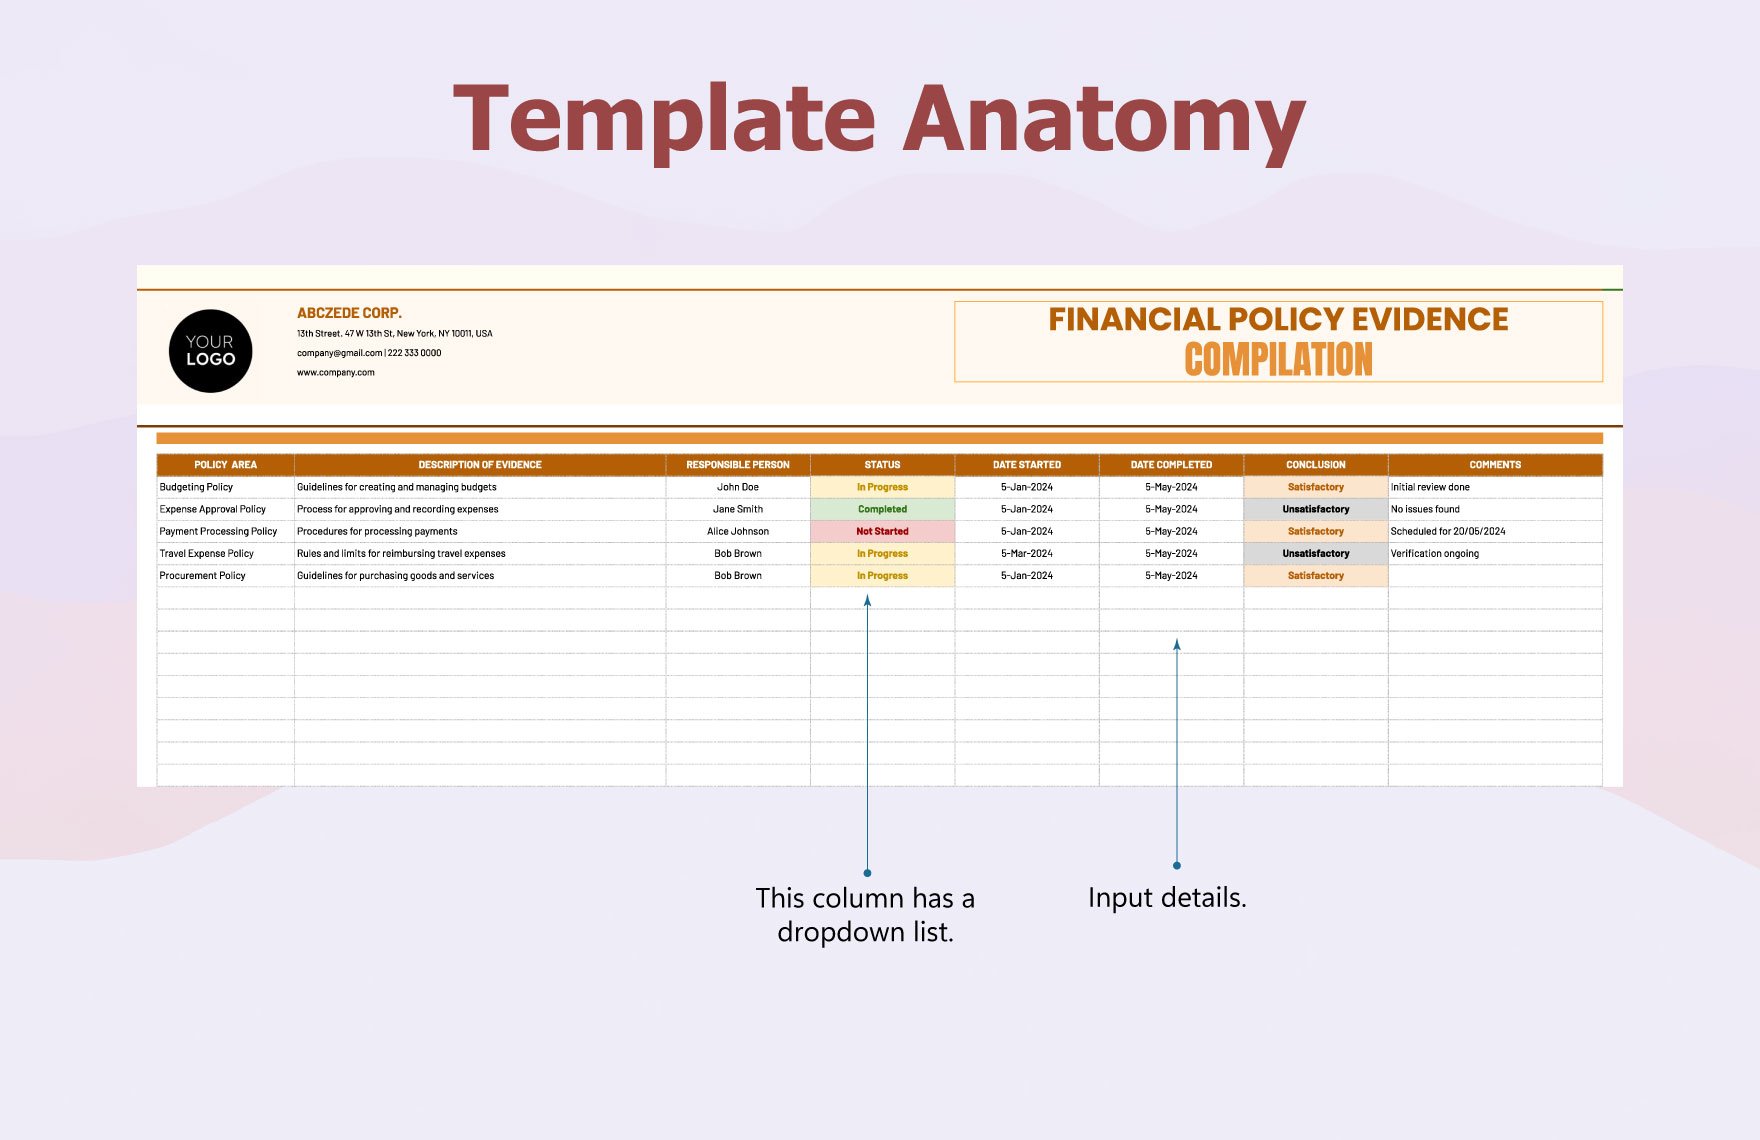 Financial Policy Evidence Compilation Template